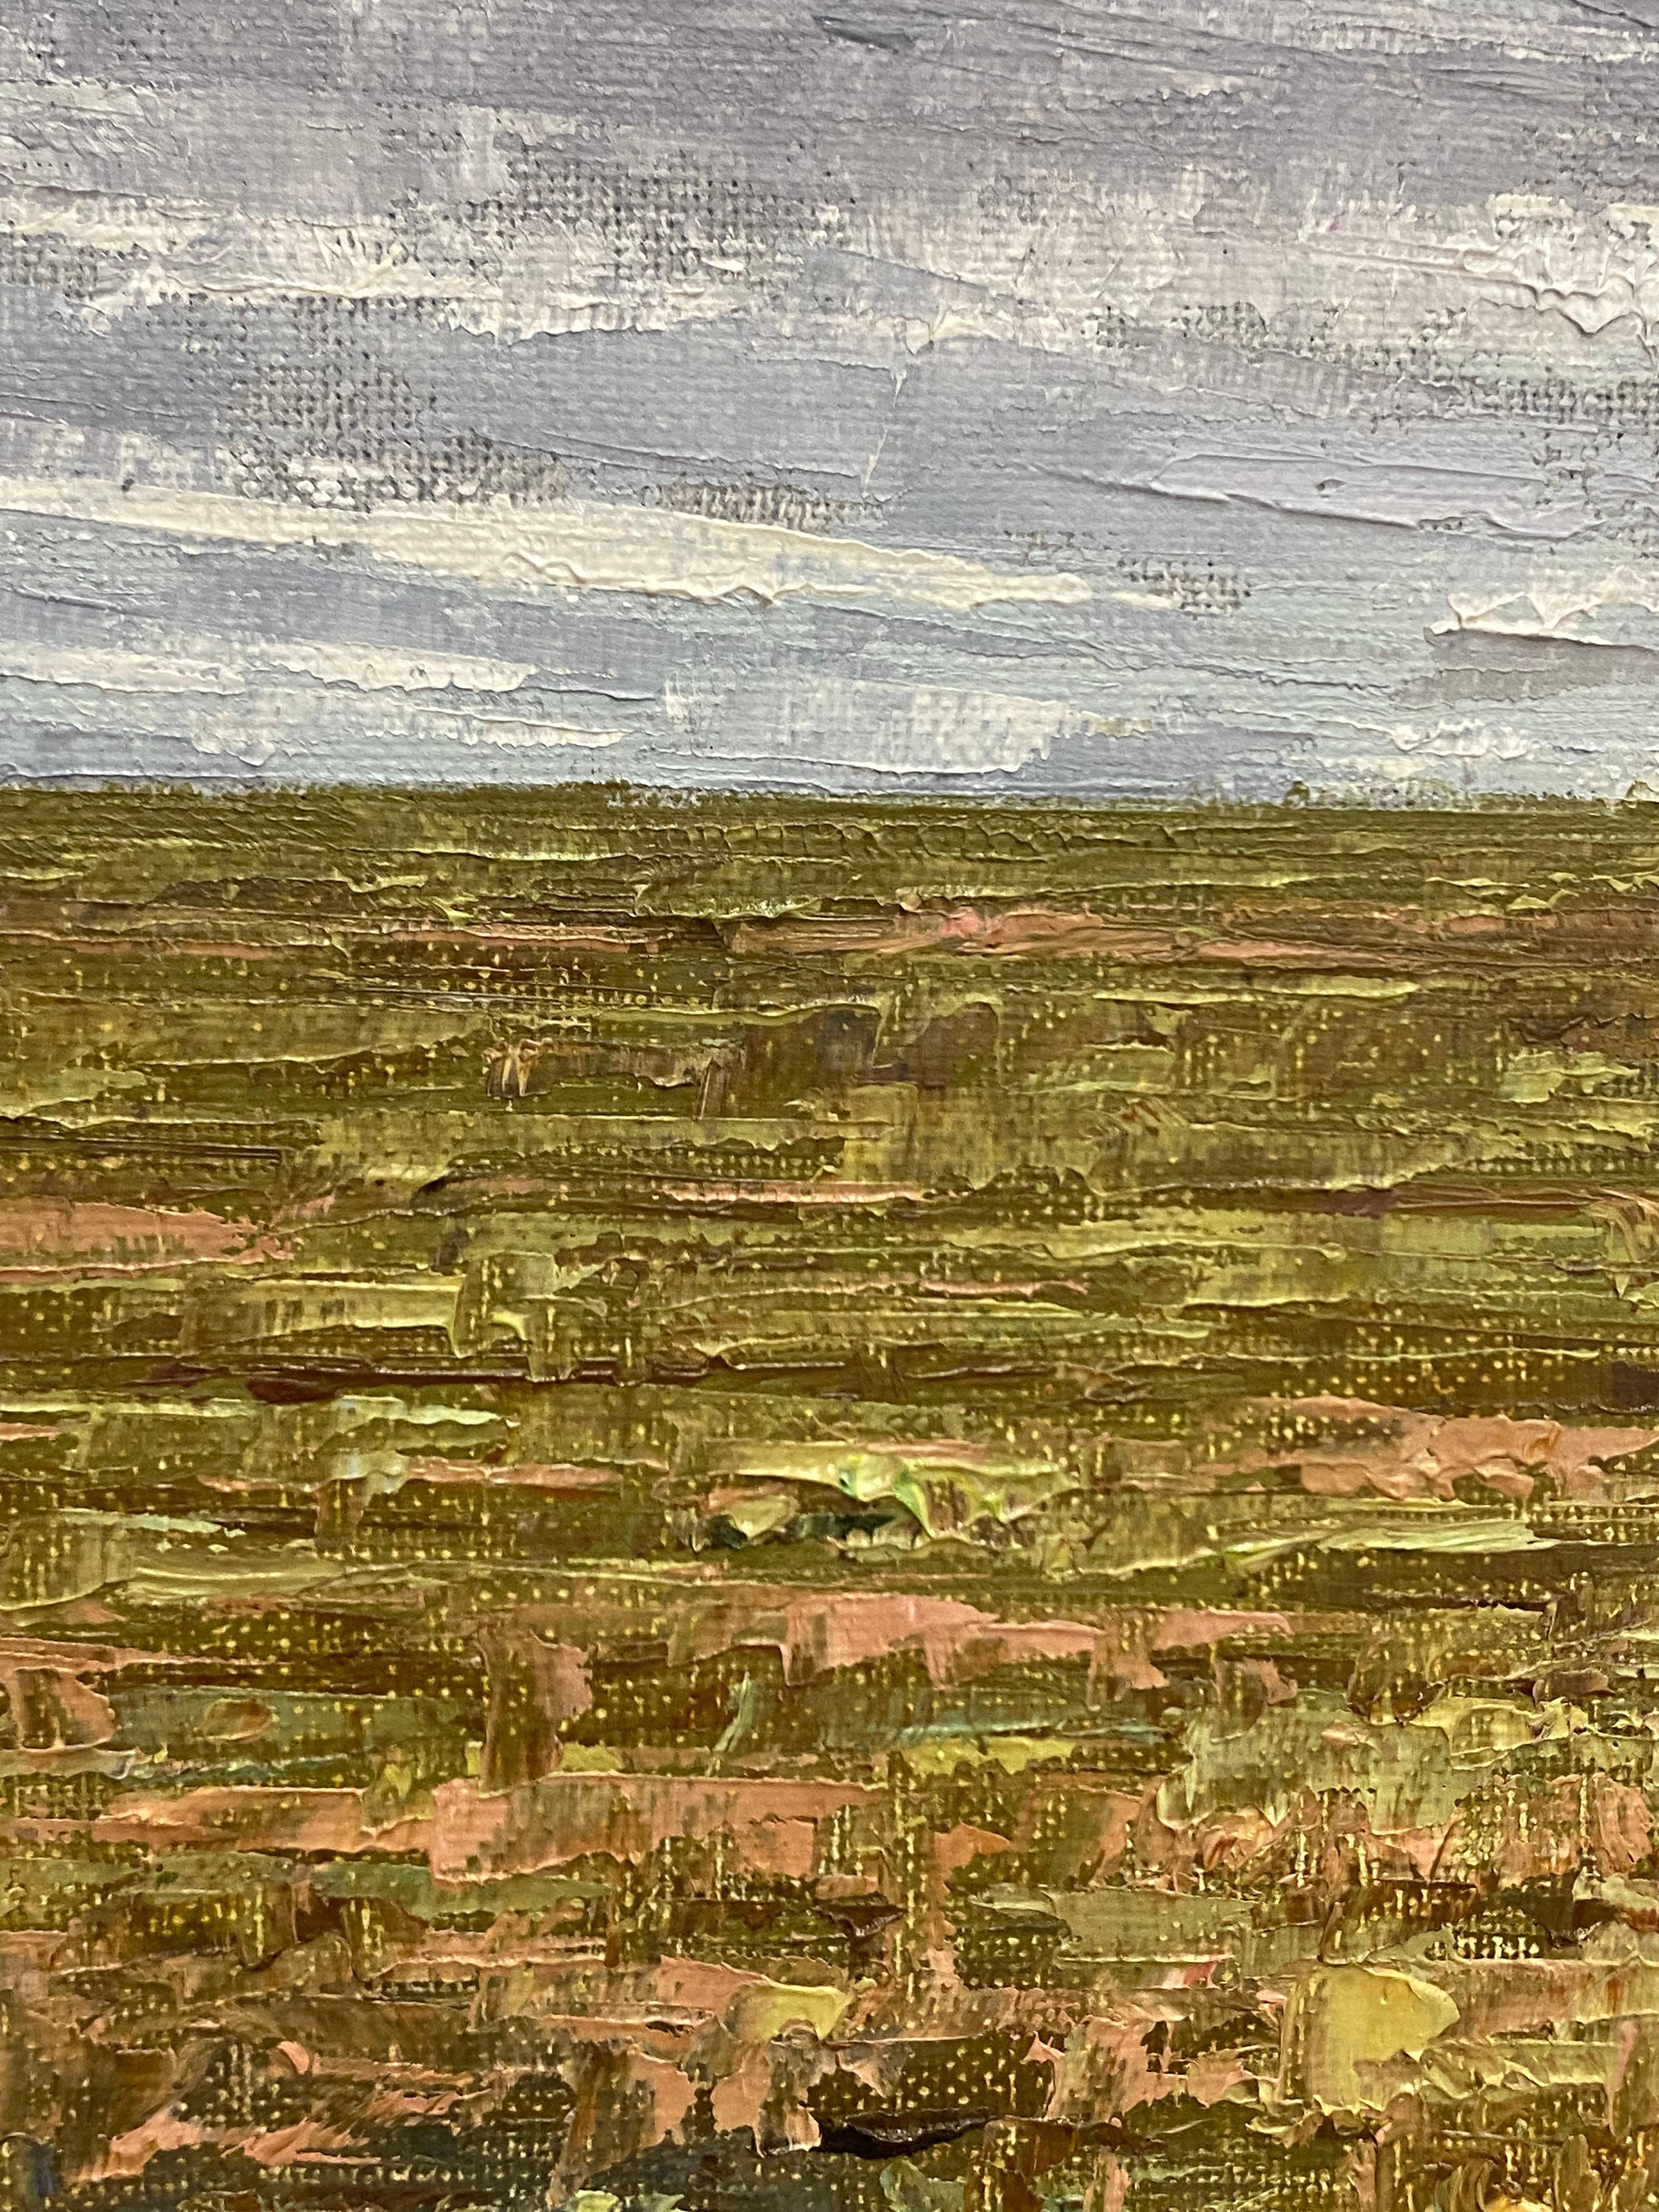 Field Painting October 27 2021, Green, Brown Grass, Gray Sky Autumn Landscape For Sale 6